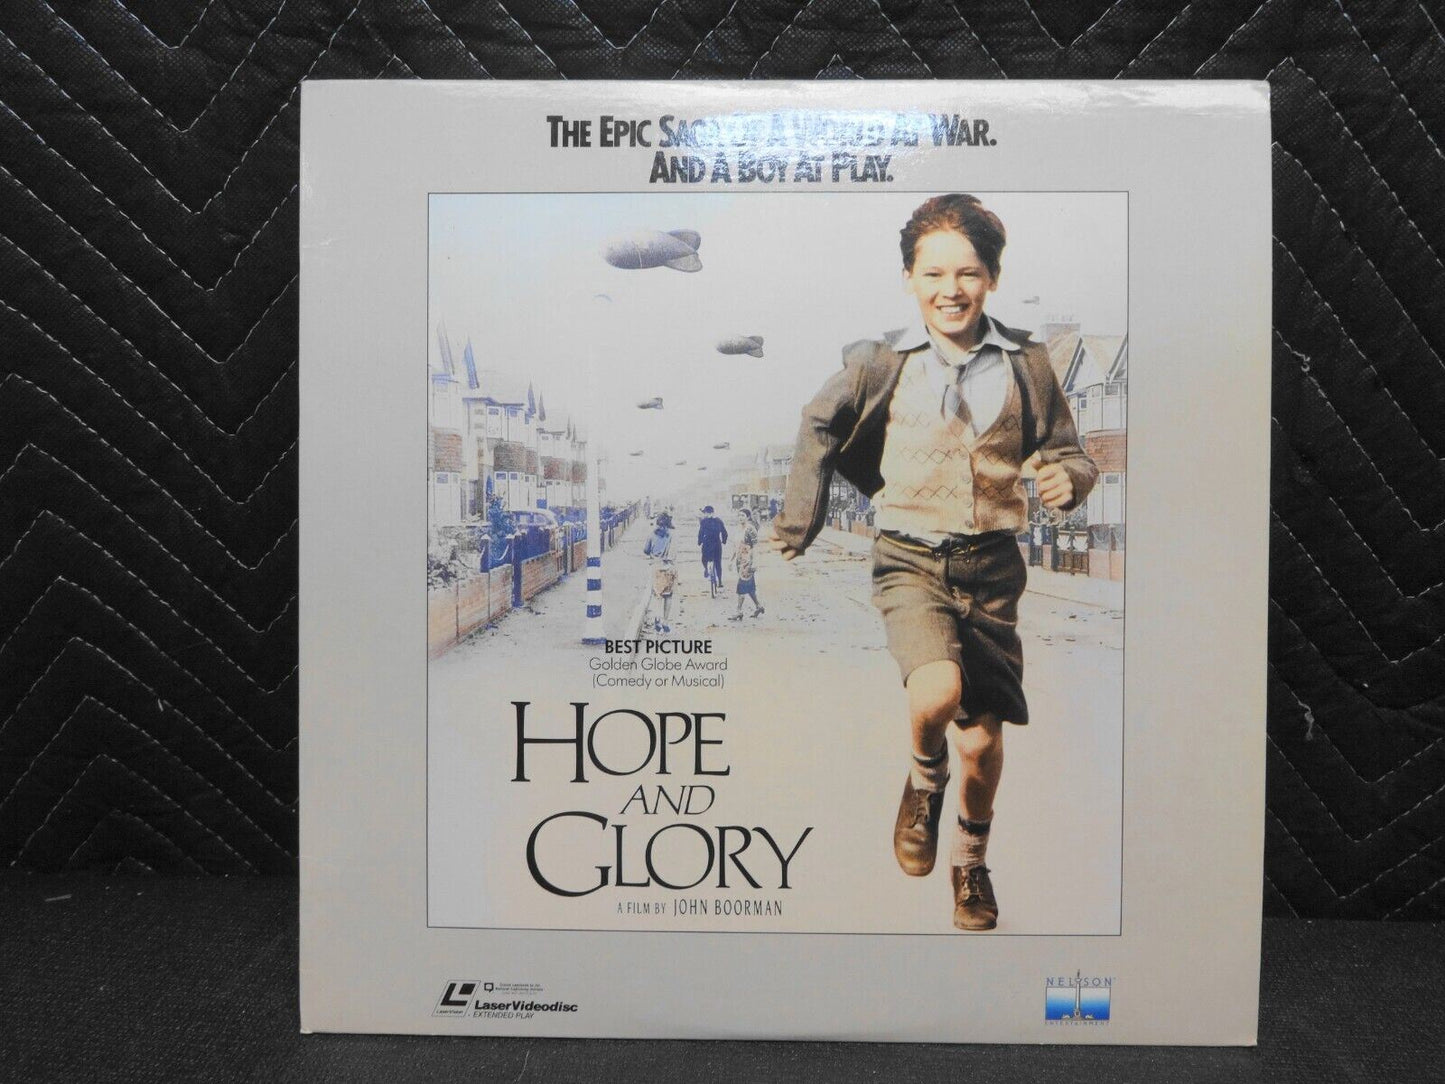 HOPE AND GLORY LASERDISC NELSON ENTERTAINMENT HOME VIDEO 1987 LASER DISC